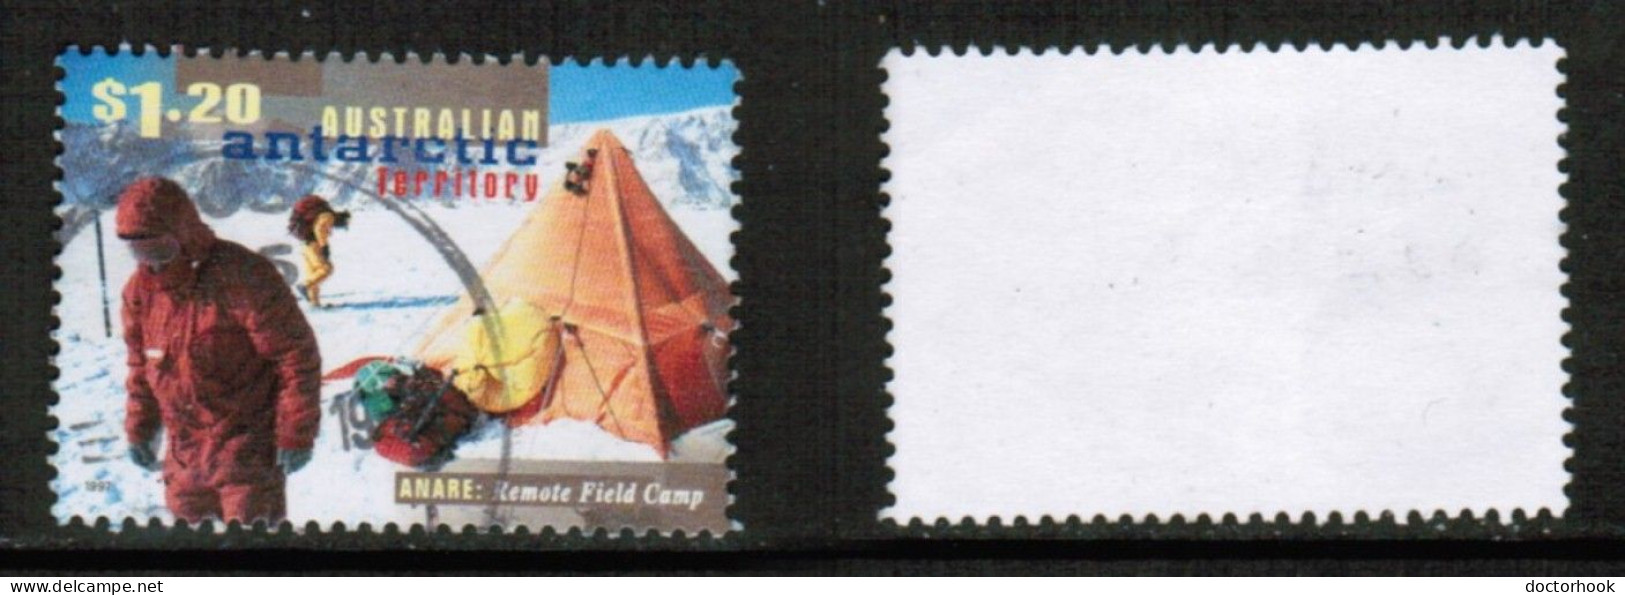 AUSTRALIAN ANTARCTIC TERRITORY   Scott # L 106 USED (CONDITION AS PER SCAN) (Stamp Scan # 930-4) - Used Stamps